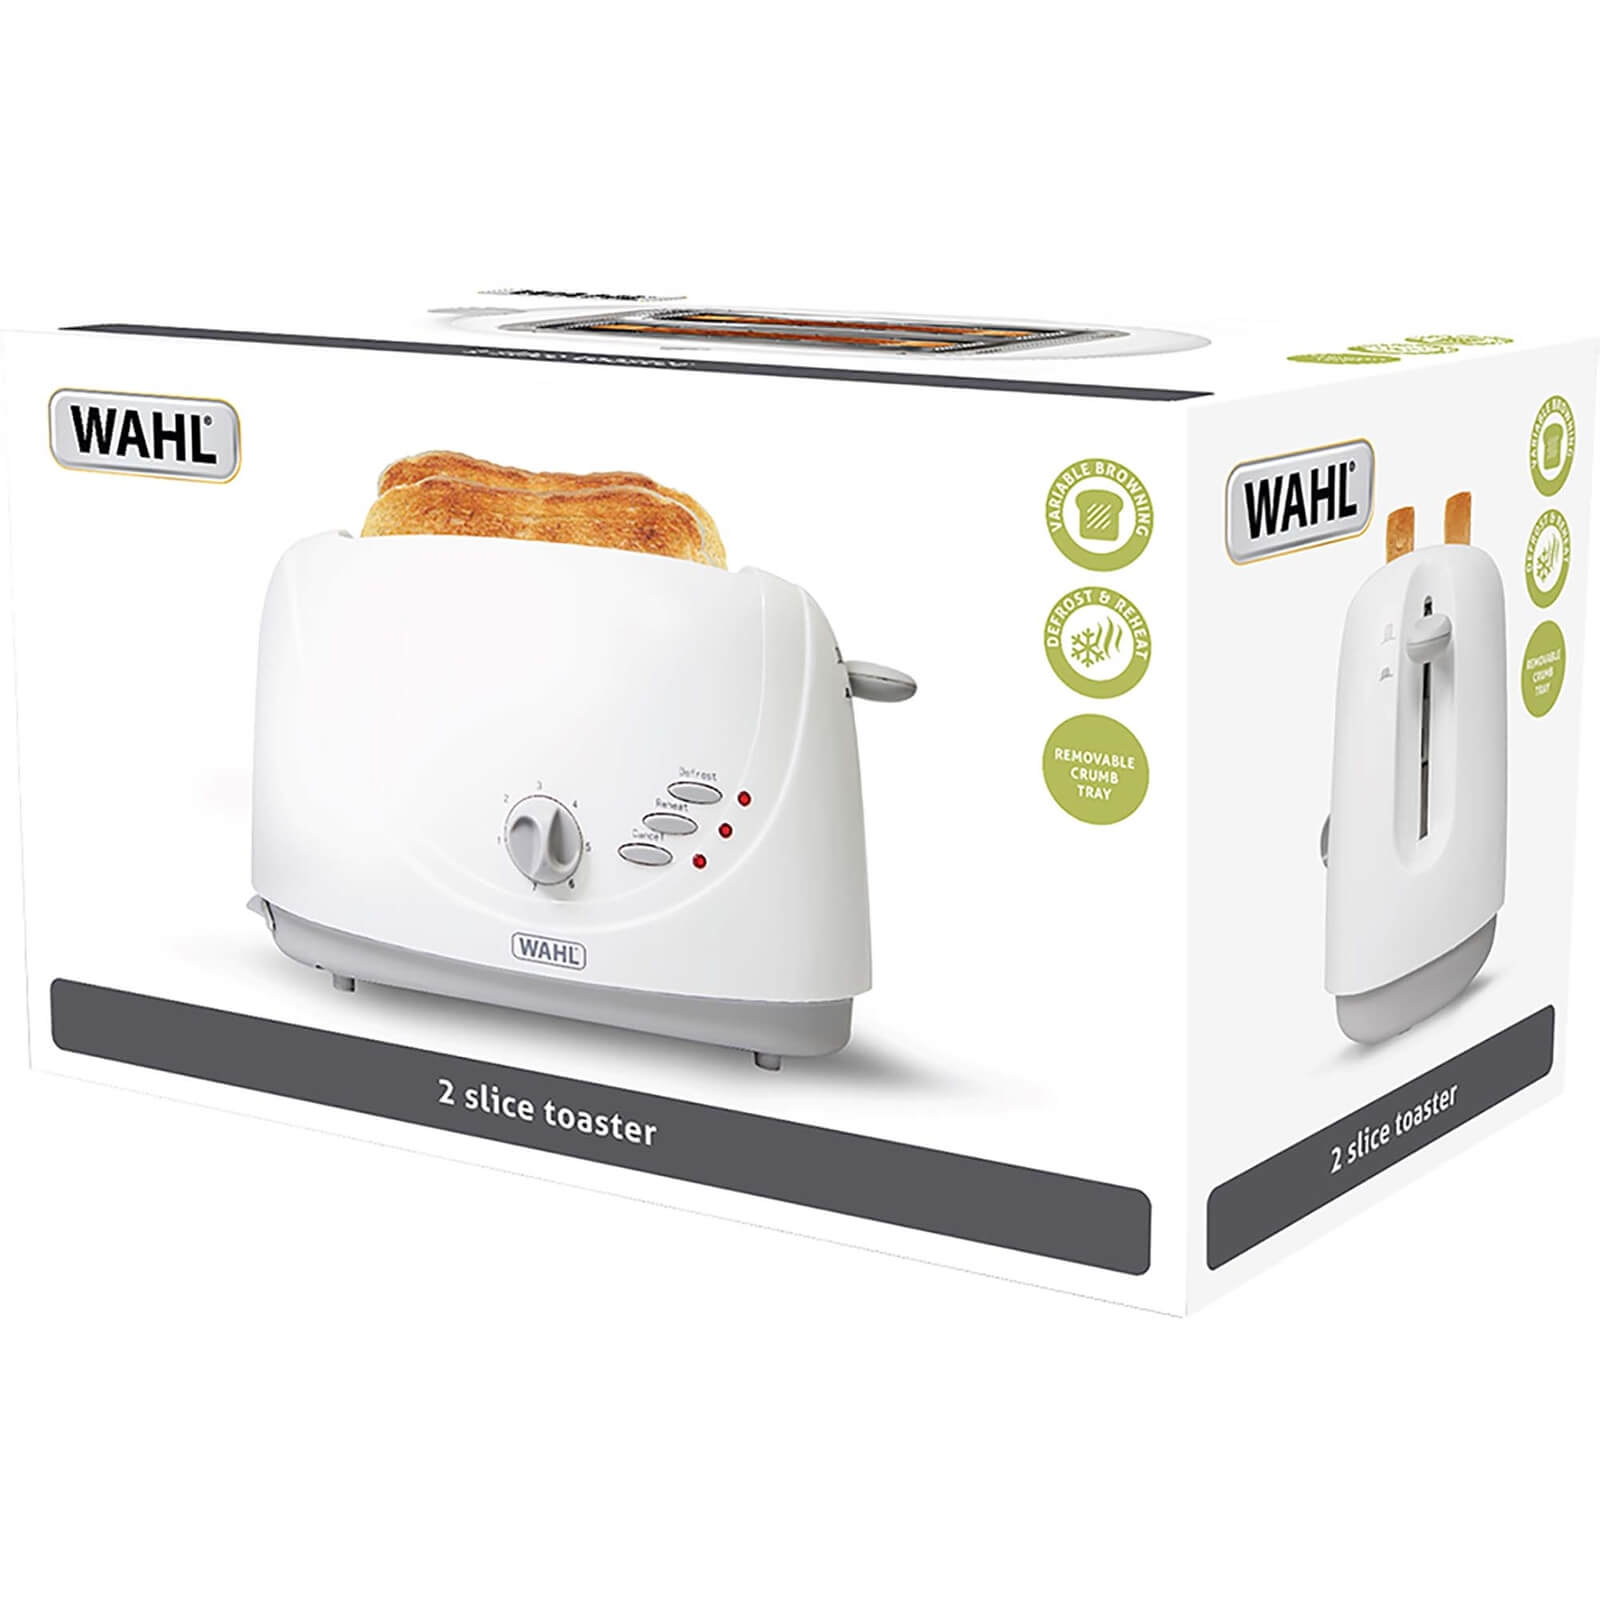 Wahl 2 Slice Toaster - White